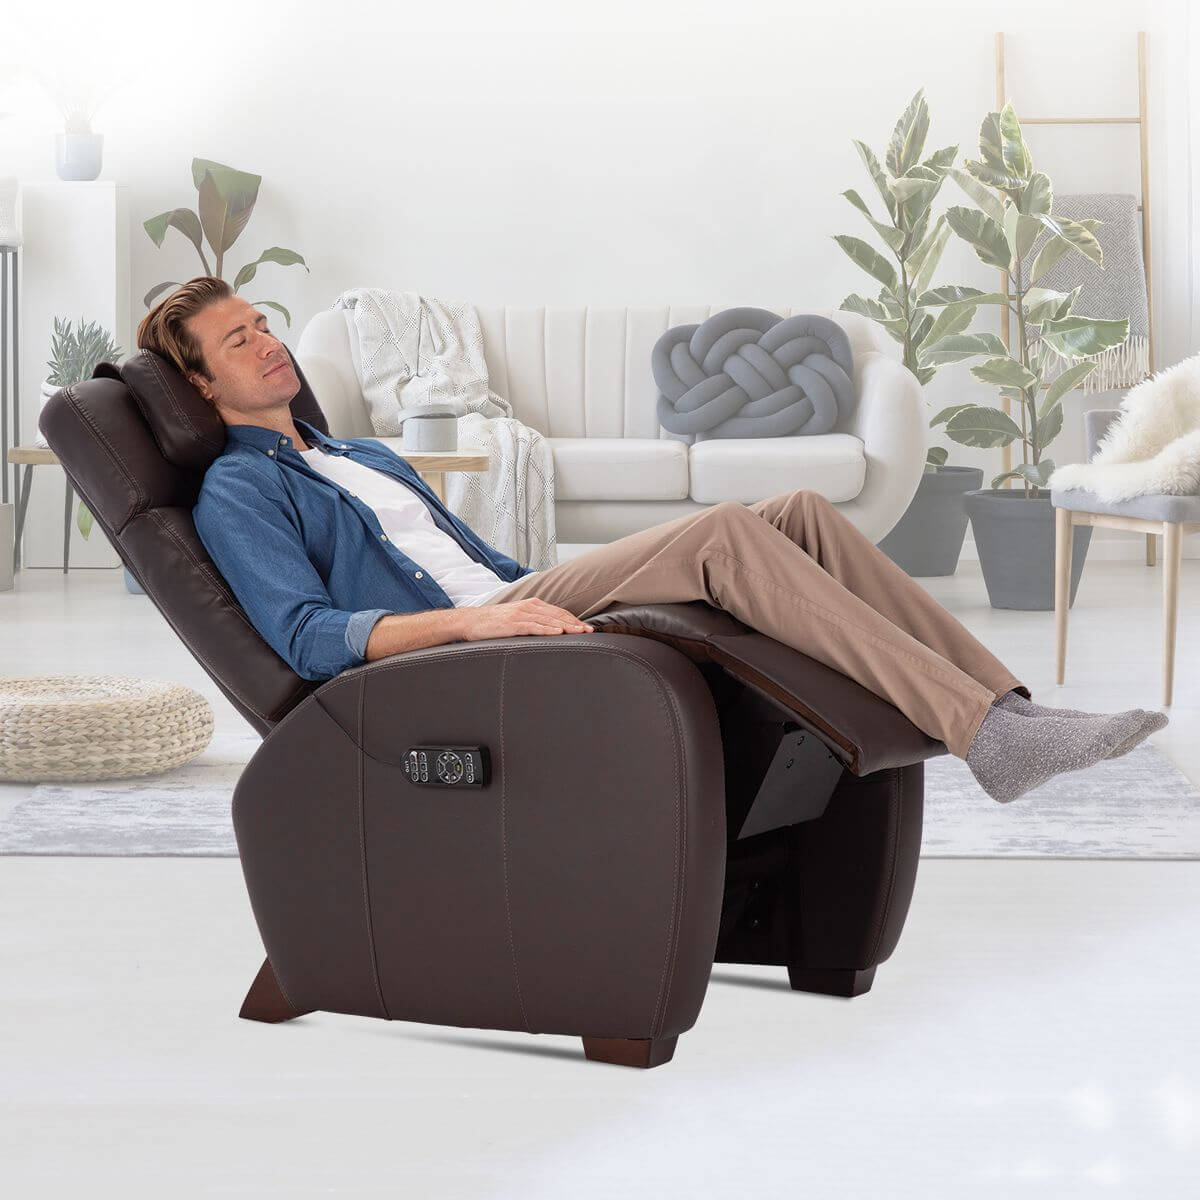 Thoughts On The Zito ZG Recliner